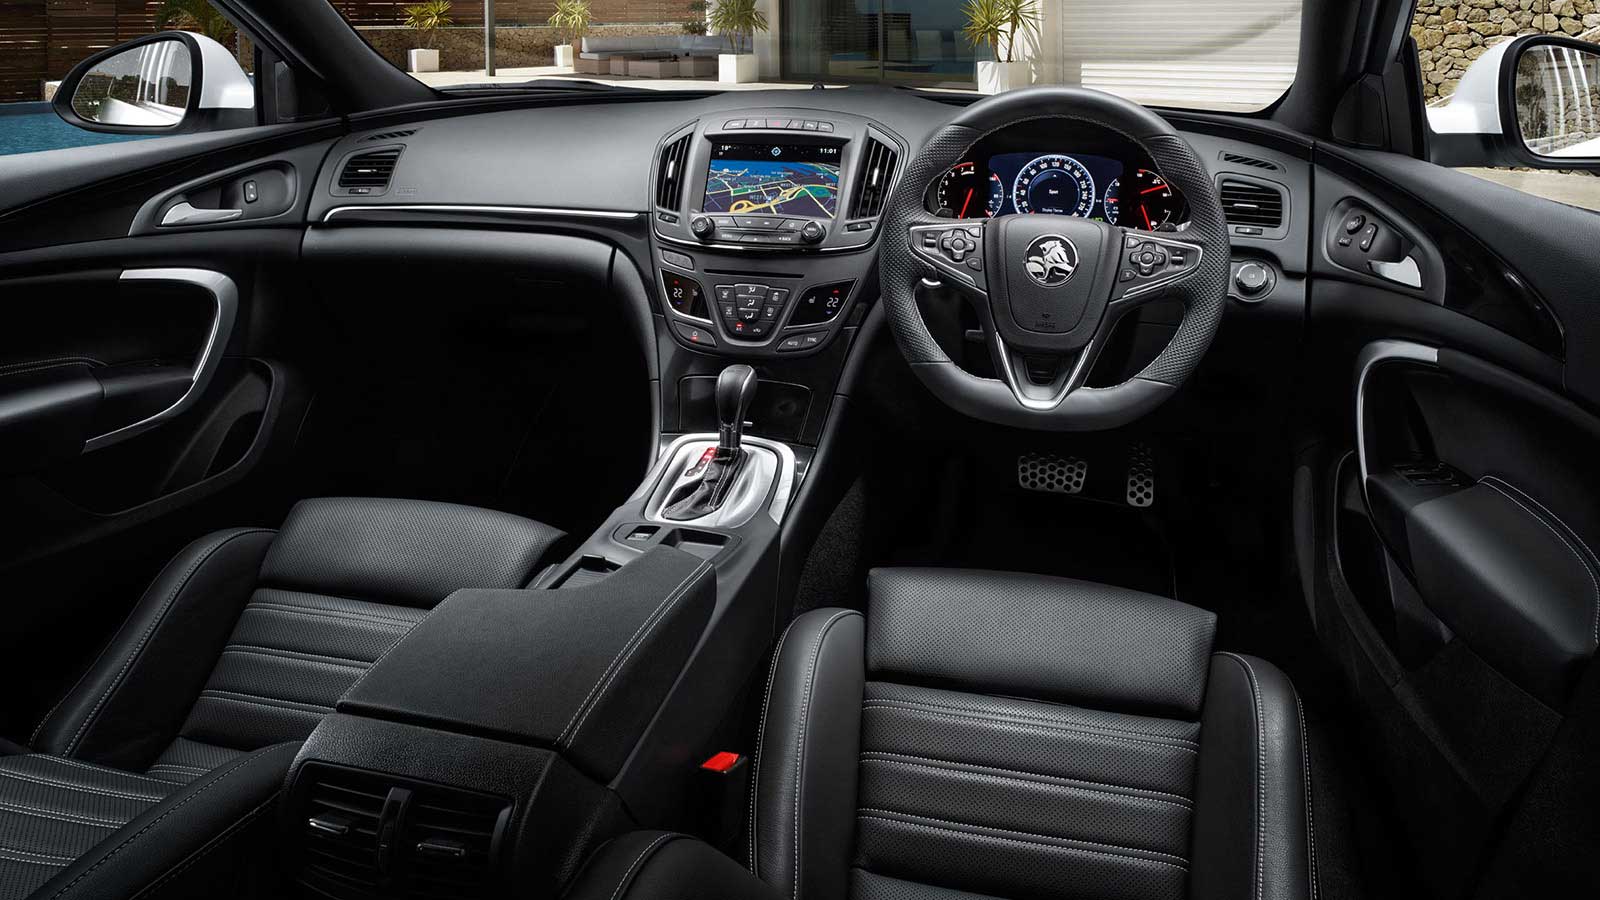 Holden Insignia VXR Interior front view